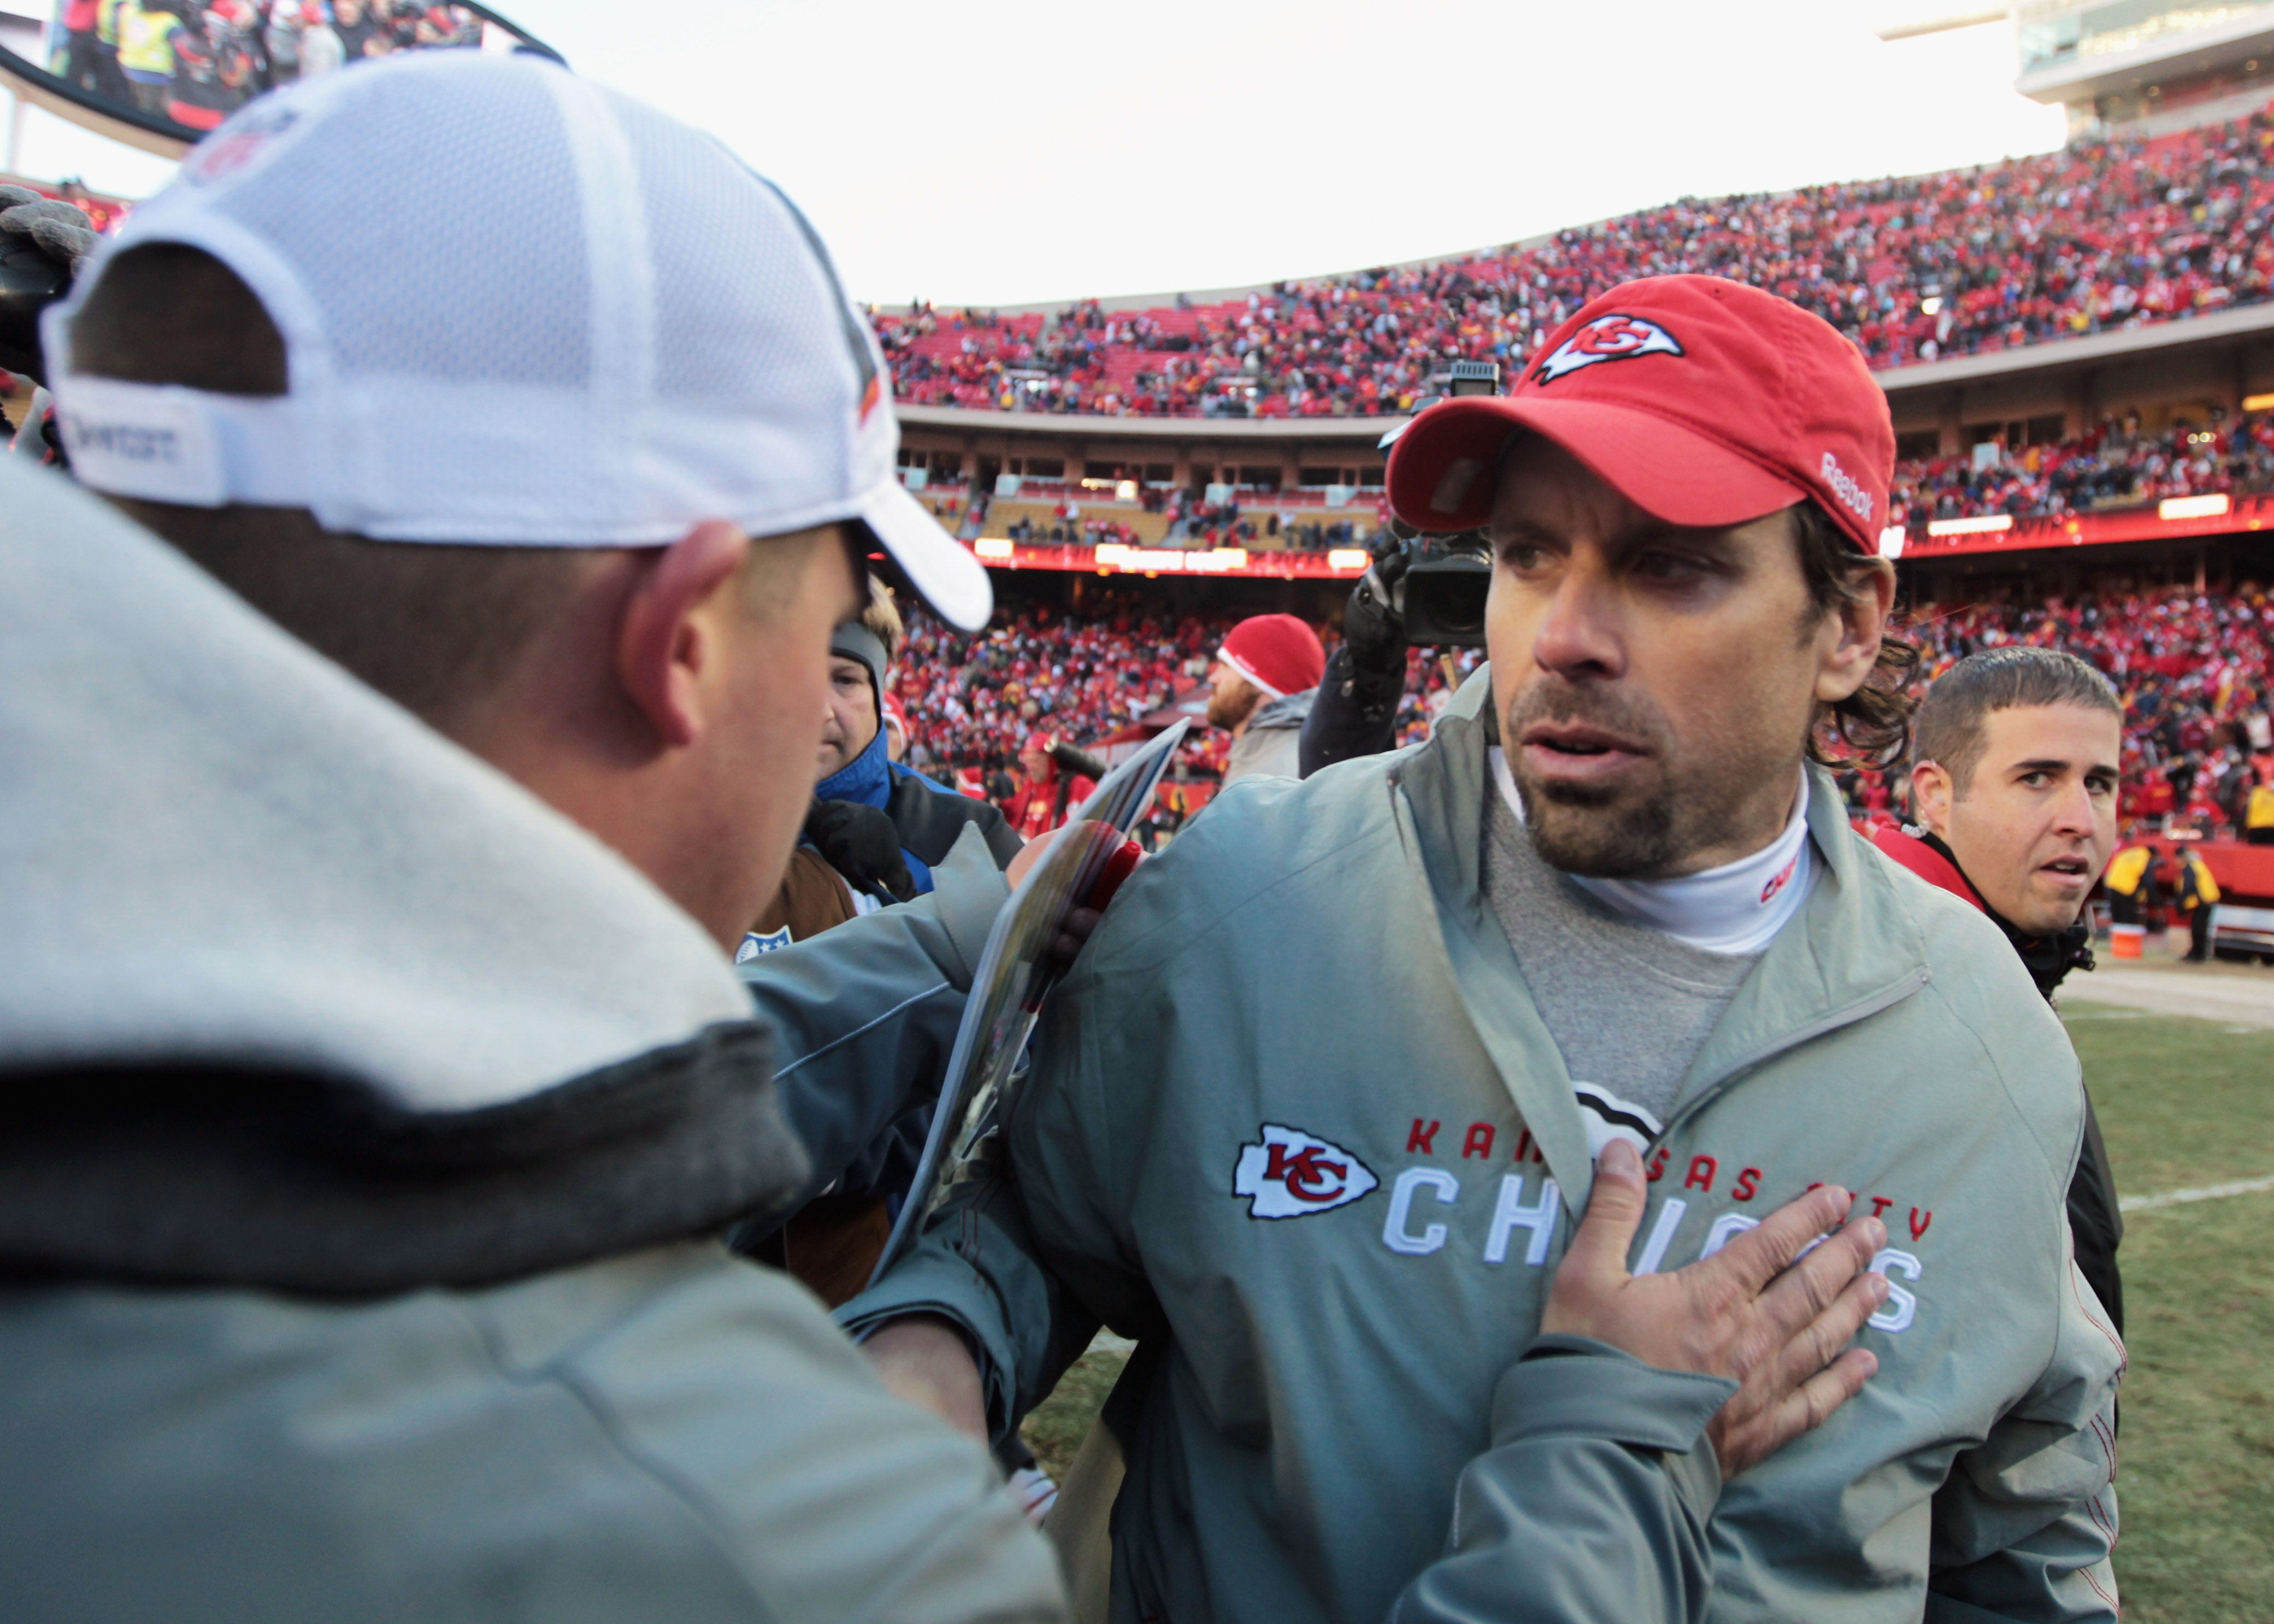 KANSAS CITY, MO - DECEMBER 05:  Head coach Todd Haley of the Kansas City Chiefs shakes hands with head coach Josh McDaniels of the Denver Broncos following the game on December 5, 2010 at Arrowhead Stadium in Kansas City, Missouri.  (Photo by Jamie Squire